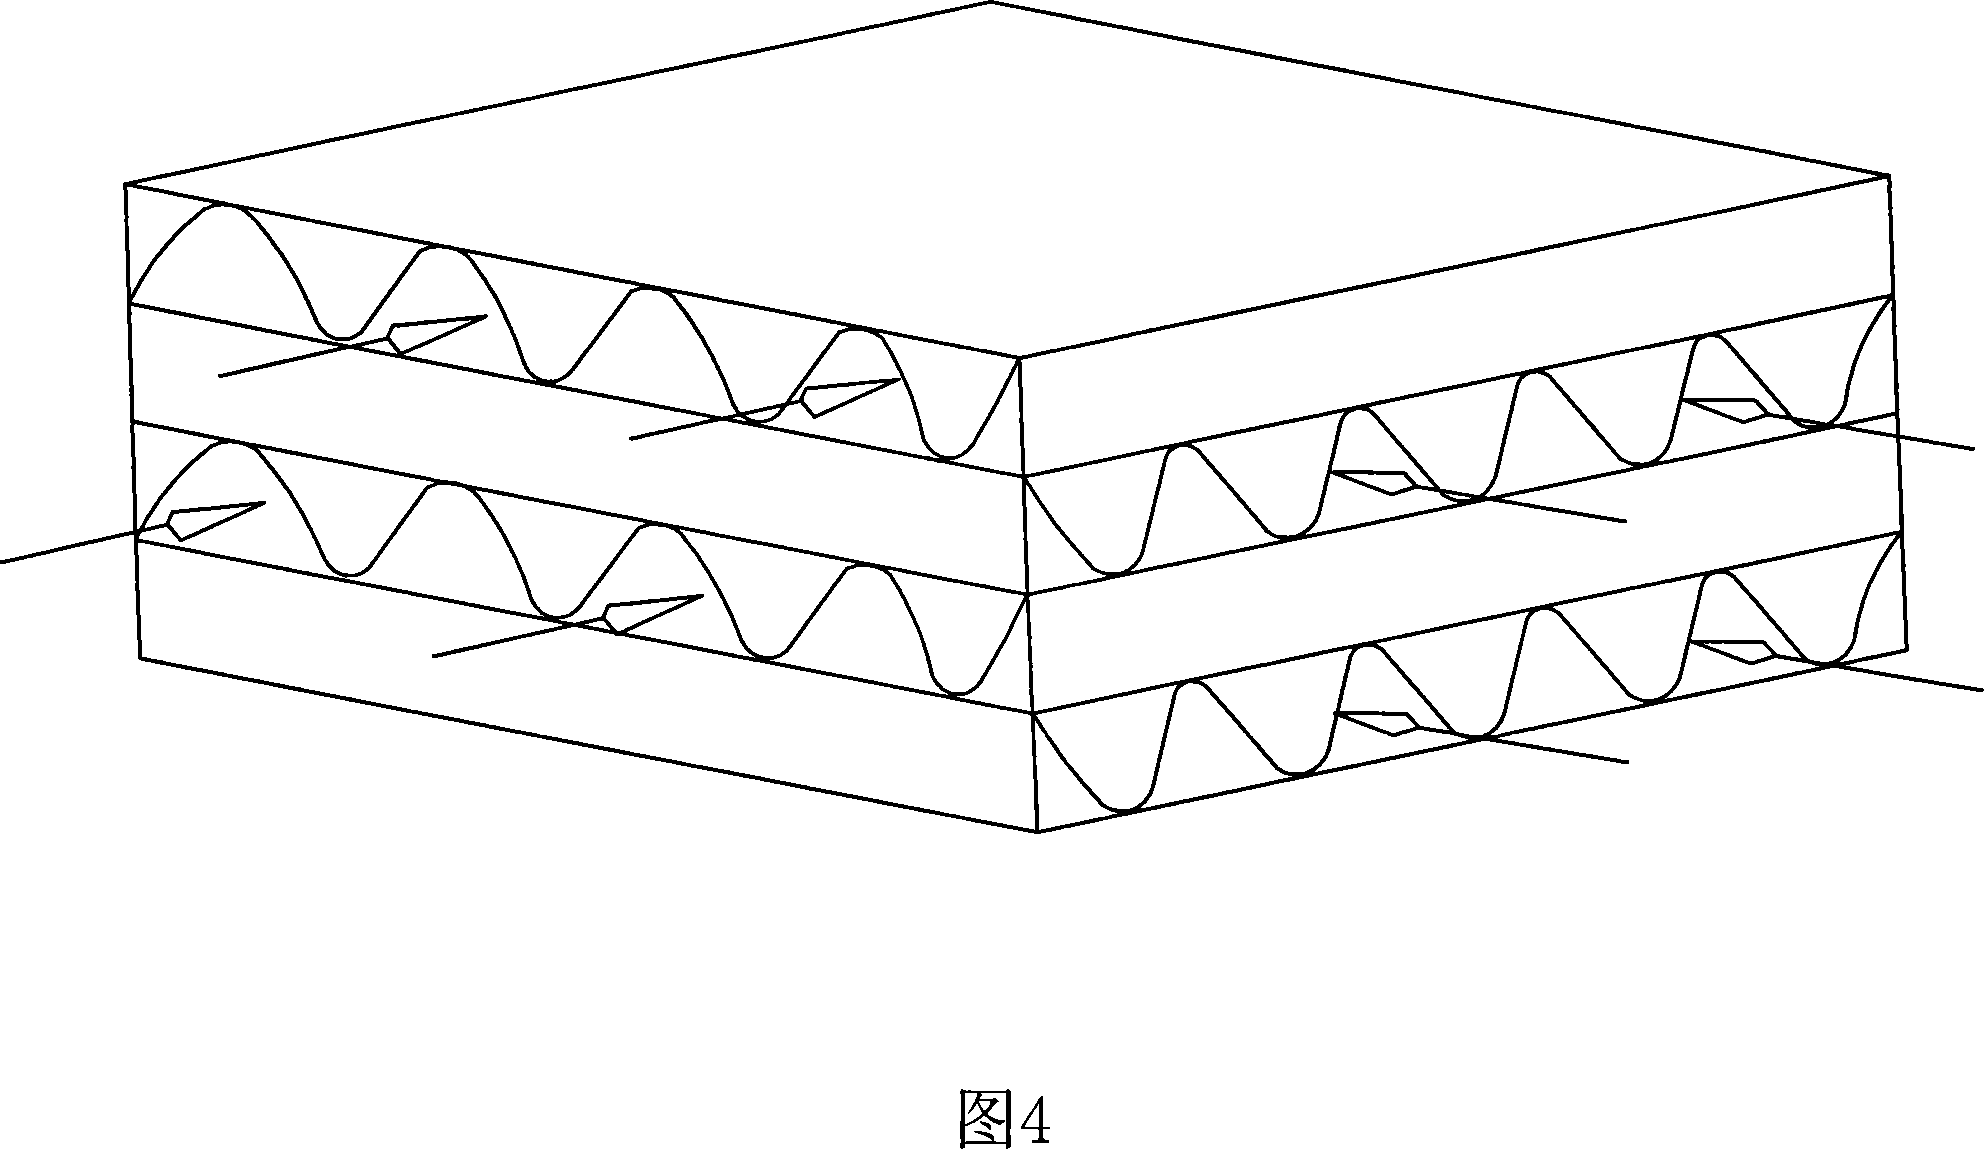 Unpowered type air heat recovery device